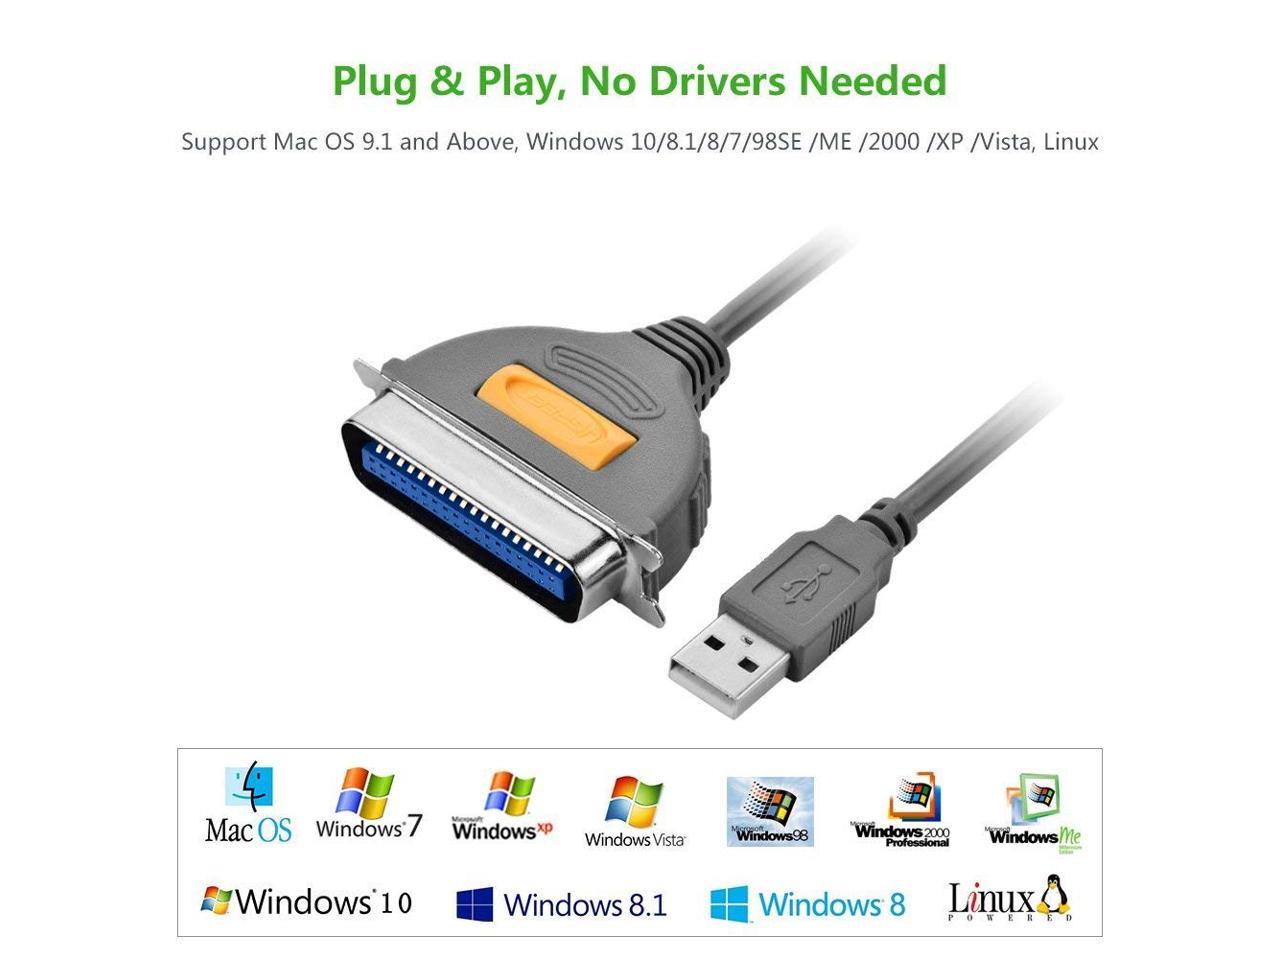 usb parallel printer cable windows 10